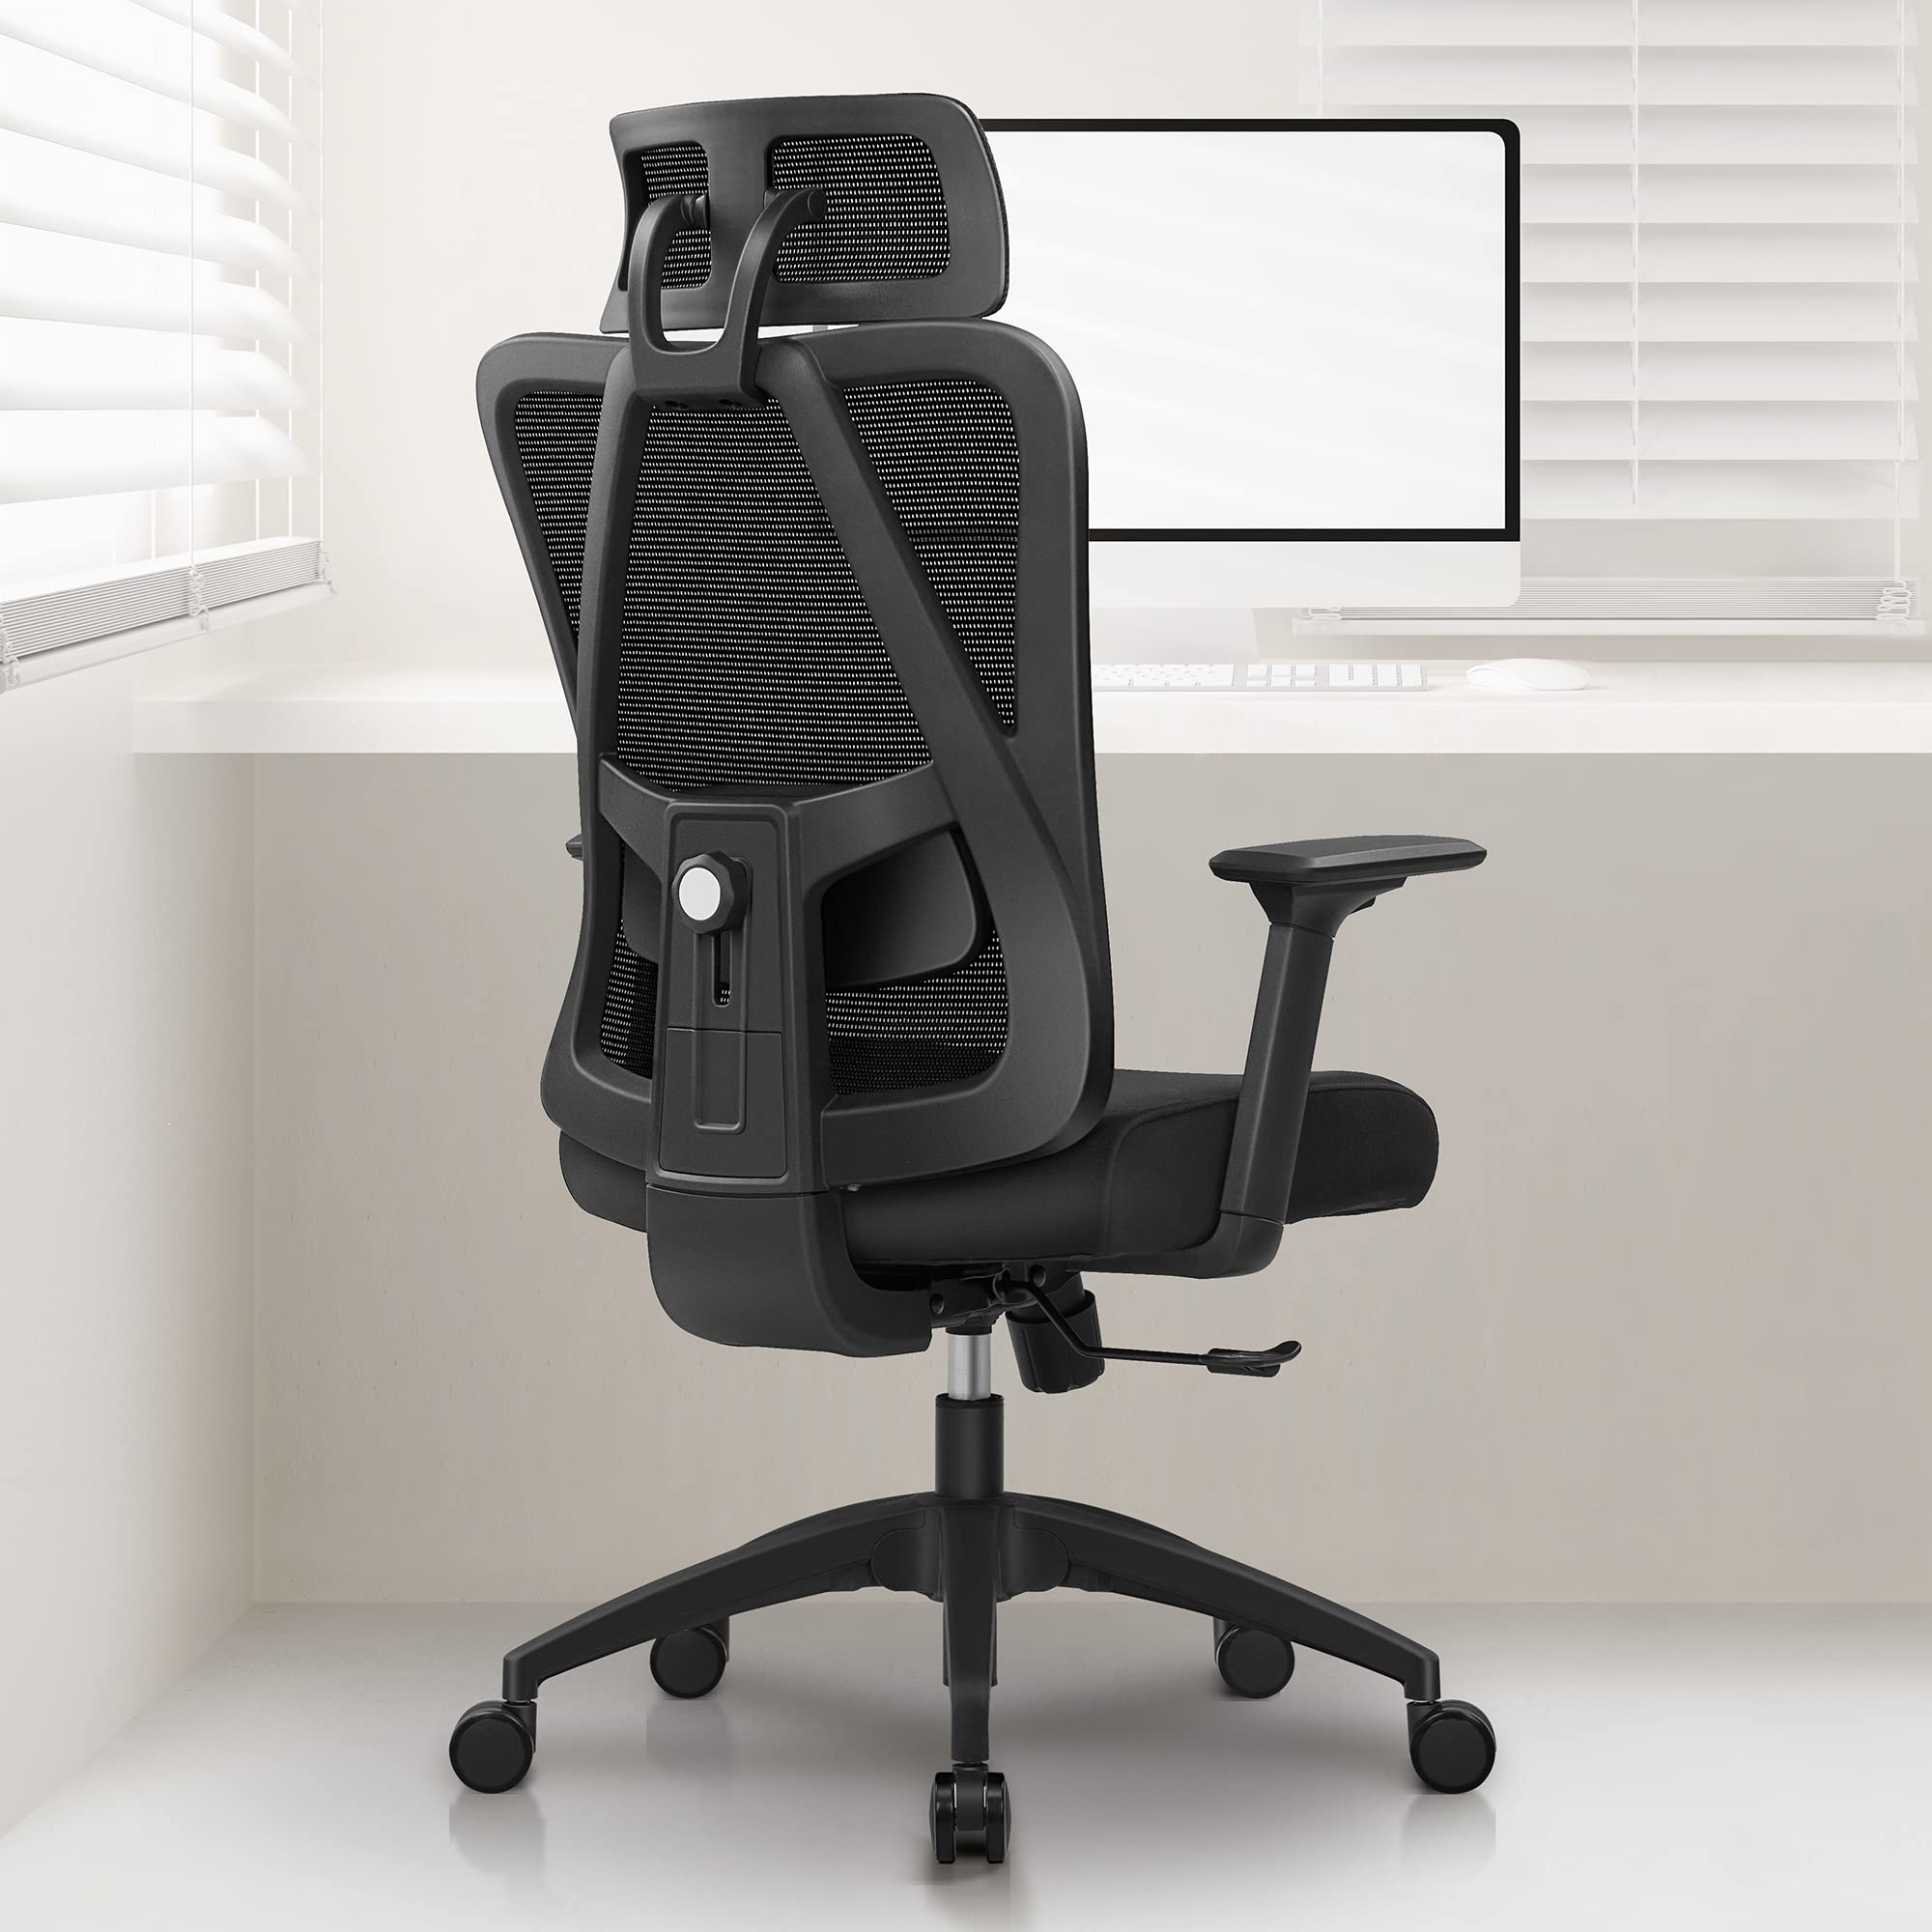 What is Lumbar Support In Ergonomic Office Chairs?